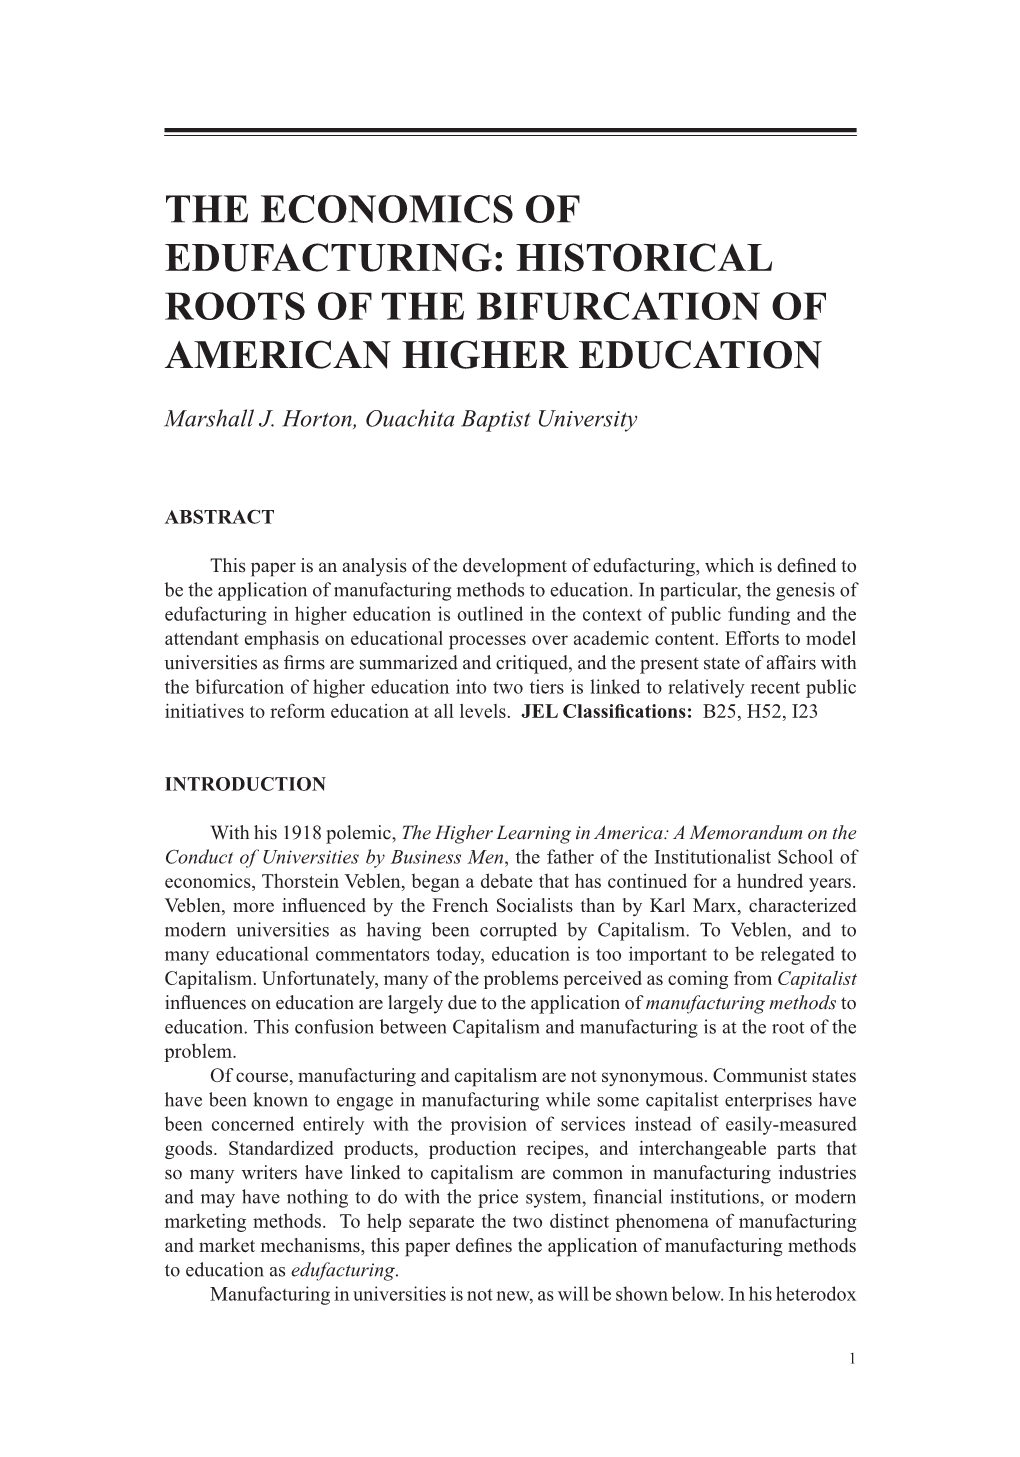 Historical Roots of the Bifurcation of American Higher Education